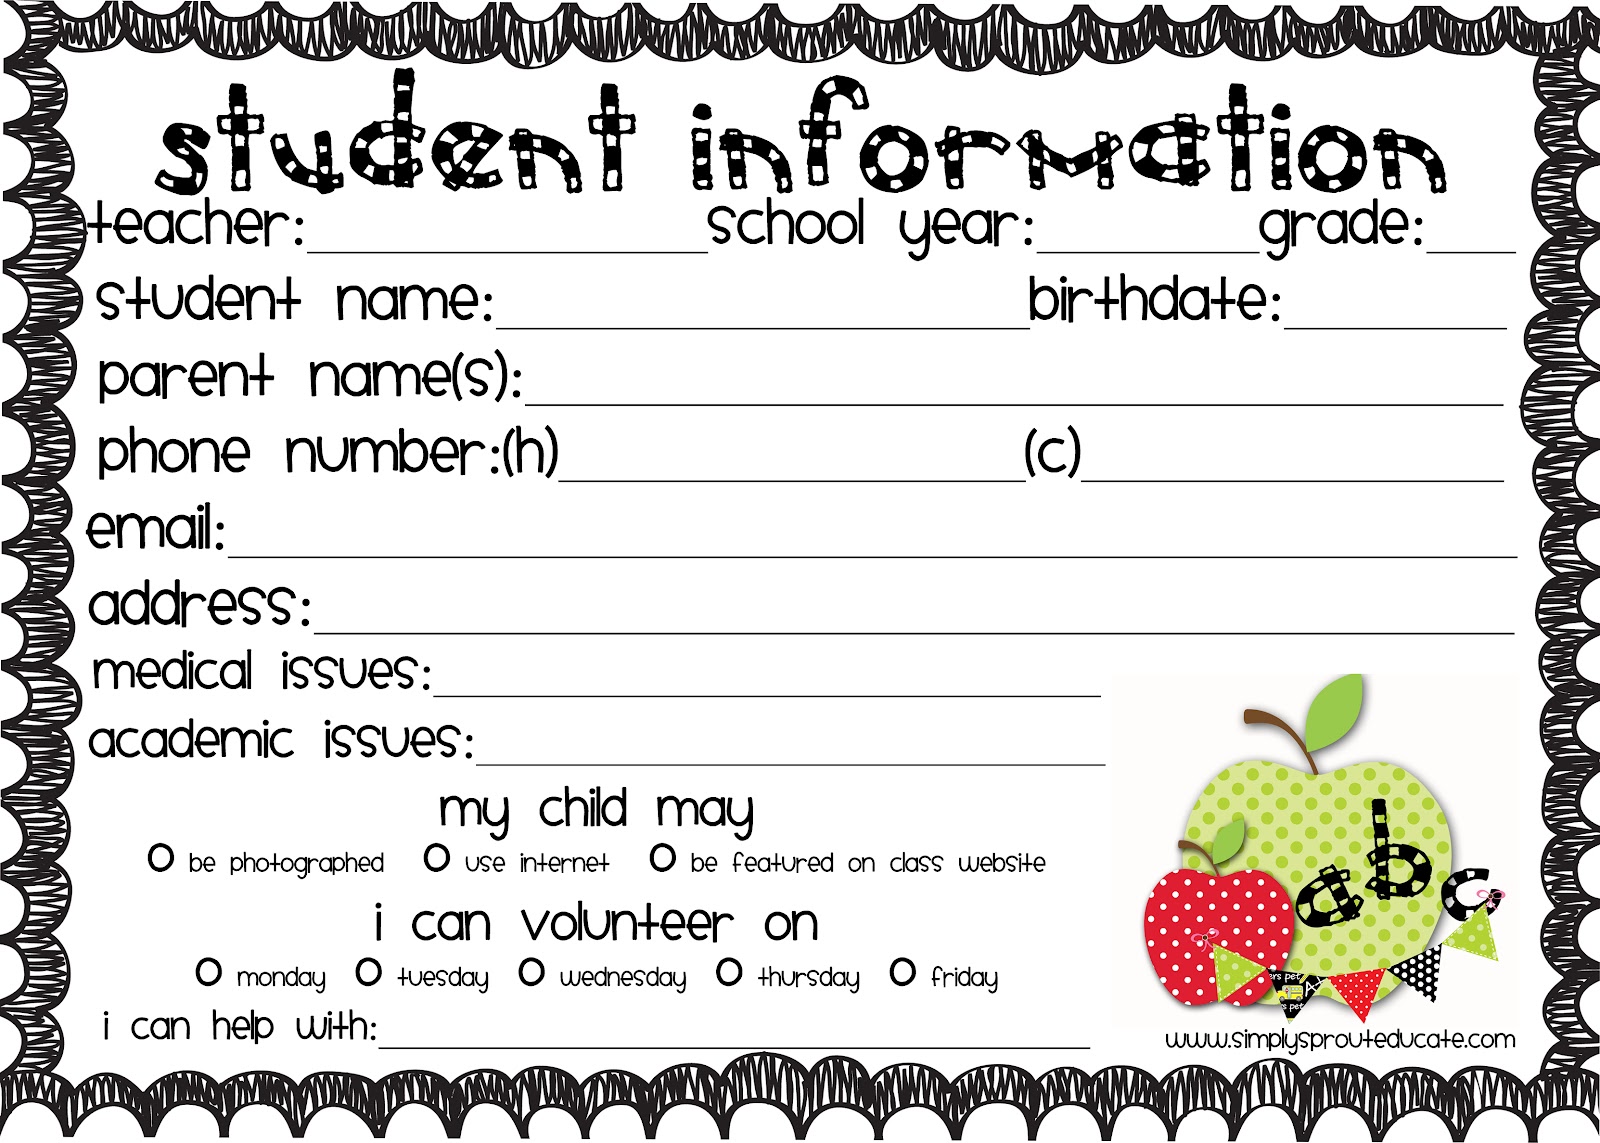 get-organized-with-our-clasroom-forms-kit-and-cute-printable-pennants